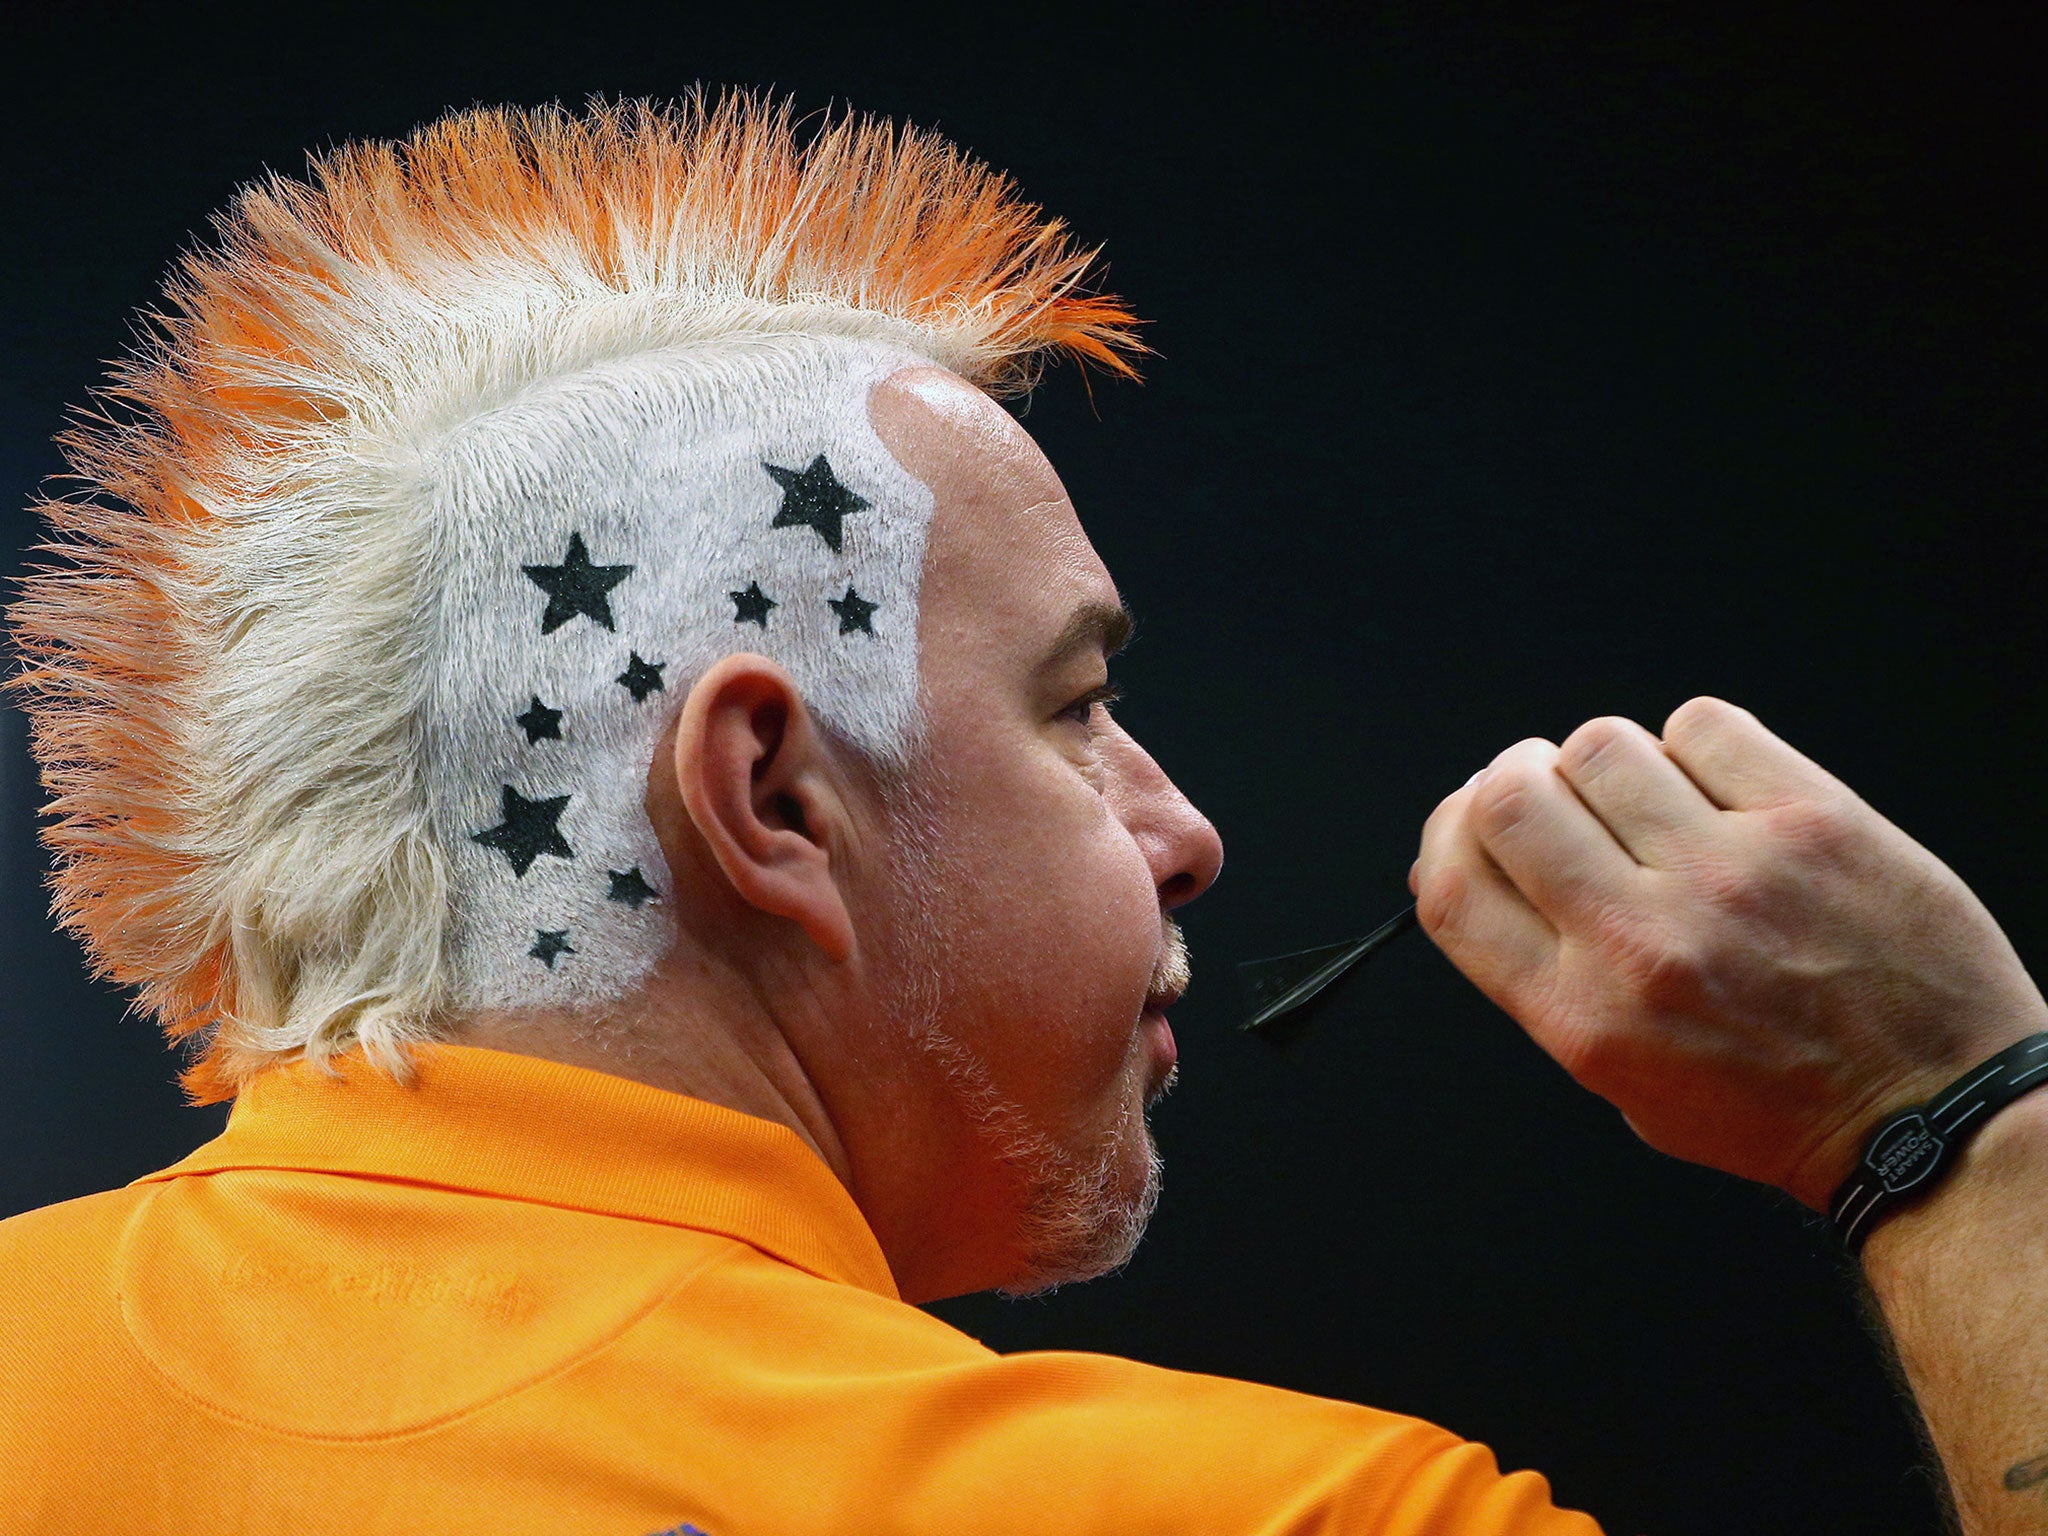 Peter Wright of Scotland shows off his hair style during his third round match against Andy Hamilton of England during the William Hill PDC World Darts Championships on Day Ten at Alexandra Palace in London